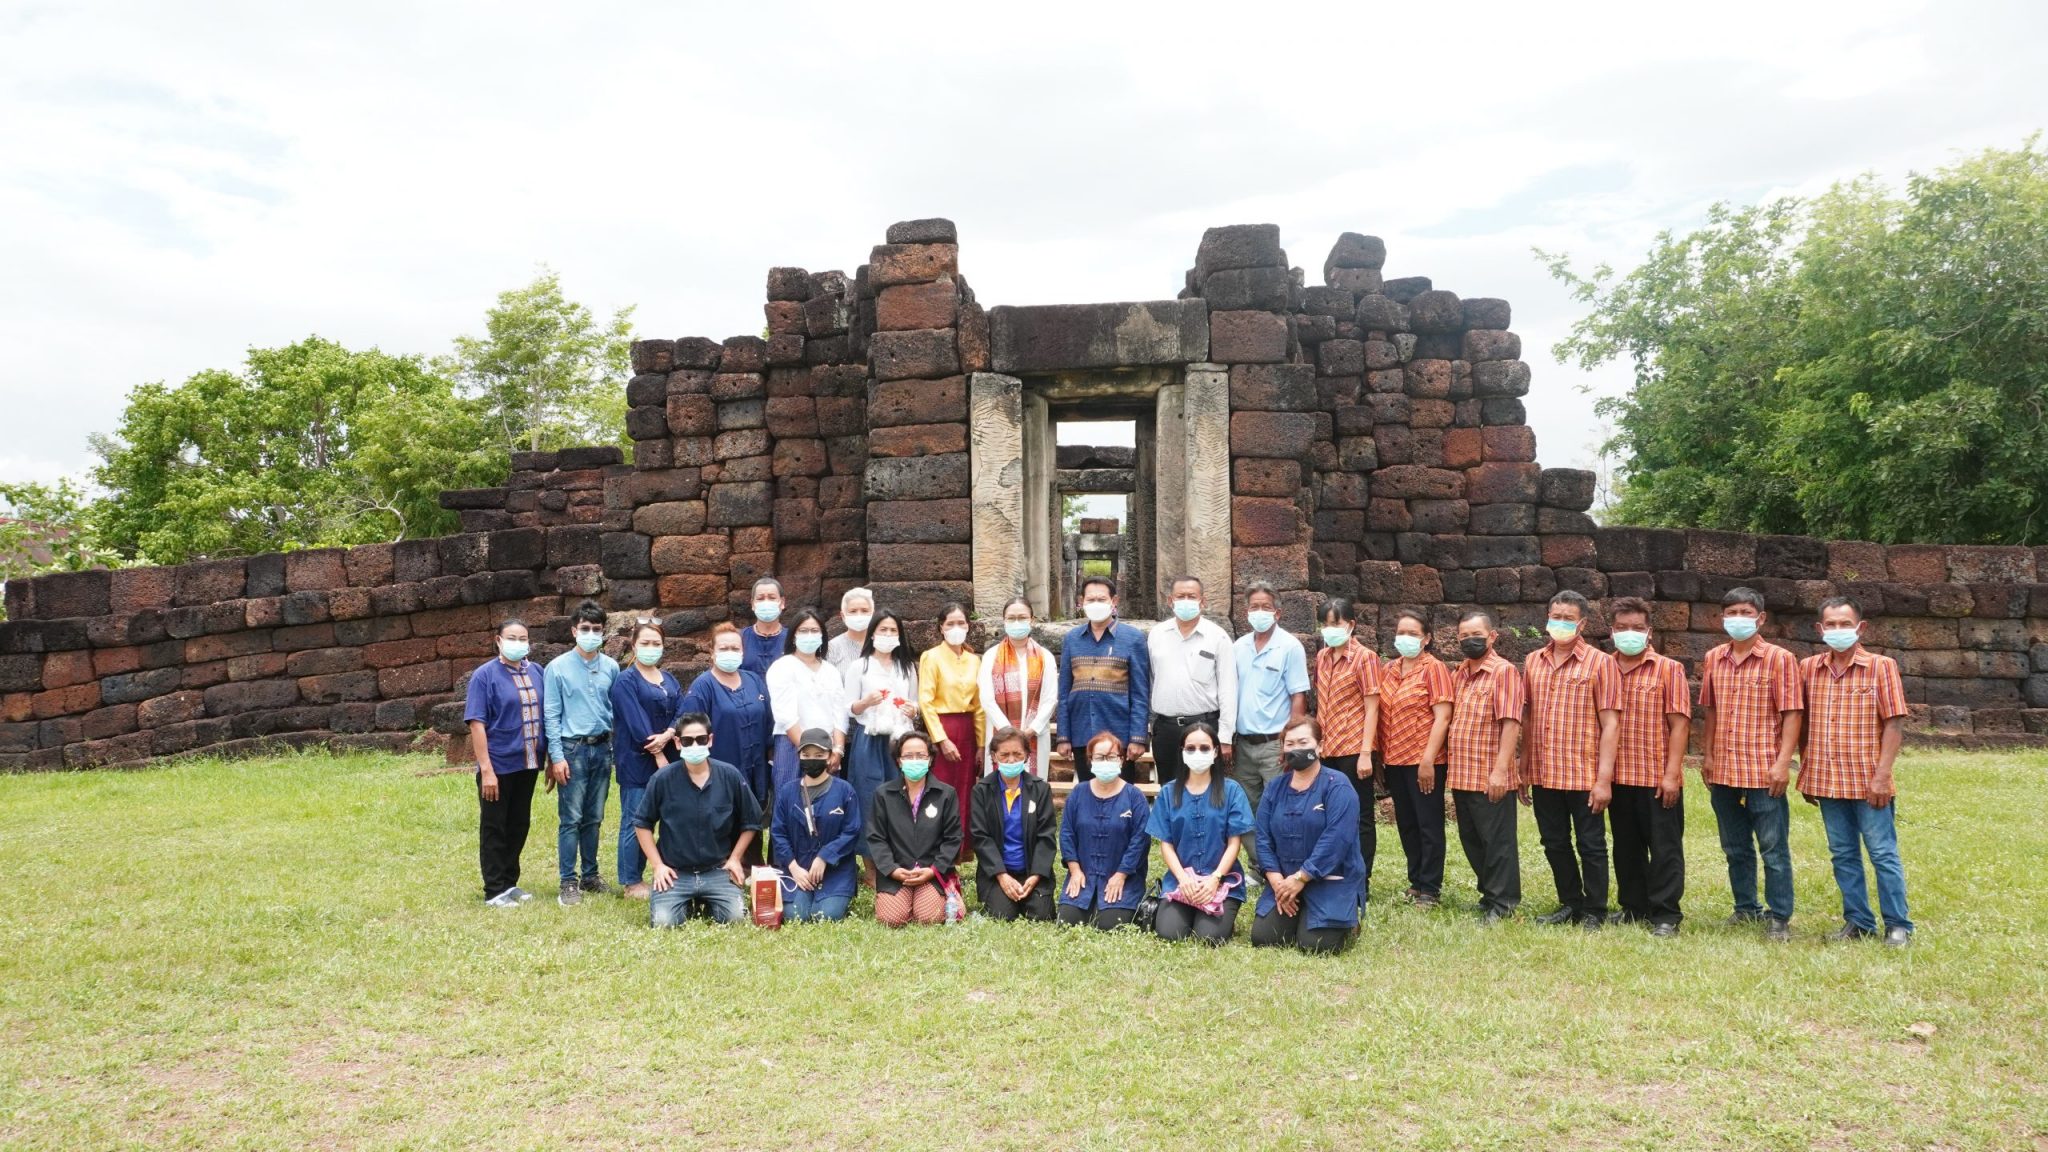 HUSO, KKU, organizes the Creative Folklore Project for marketing cultural wisdom heritage and promoting the archaeological tourism site at Koo Kaew Health-Care Shrine